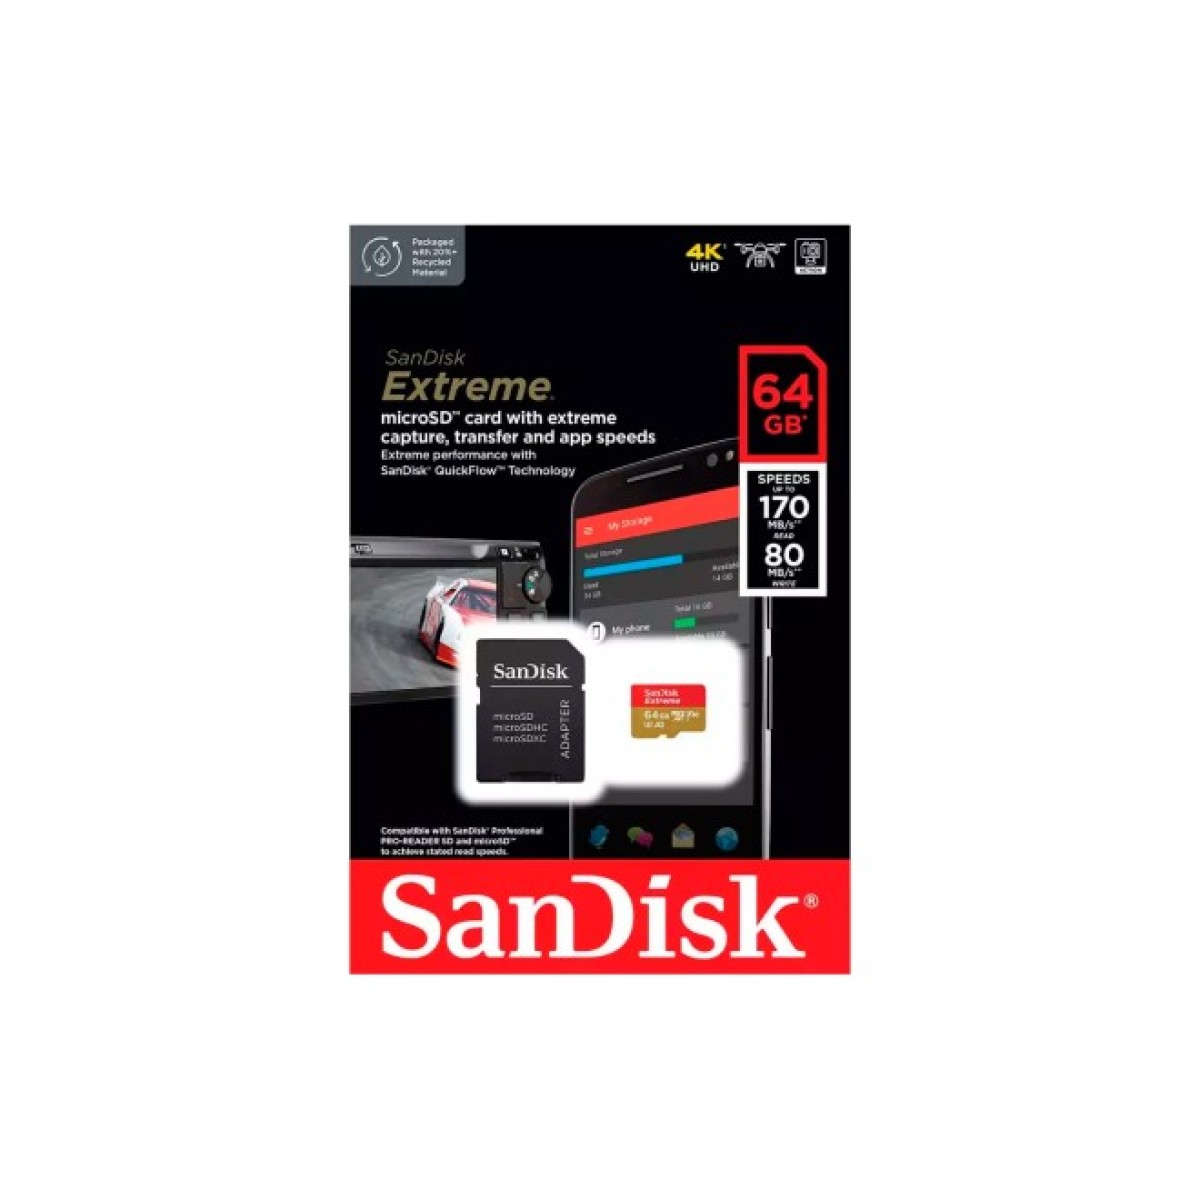 Карта пам'яті SanDisk 64GB microSD class 10 UHS-I Extreme For Action Cams and Dro (SDSQXAH-064G-GN6AA) 98_98.jpg - фото 4